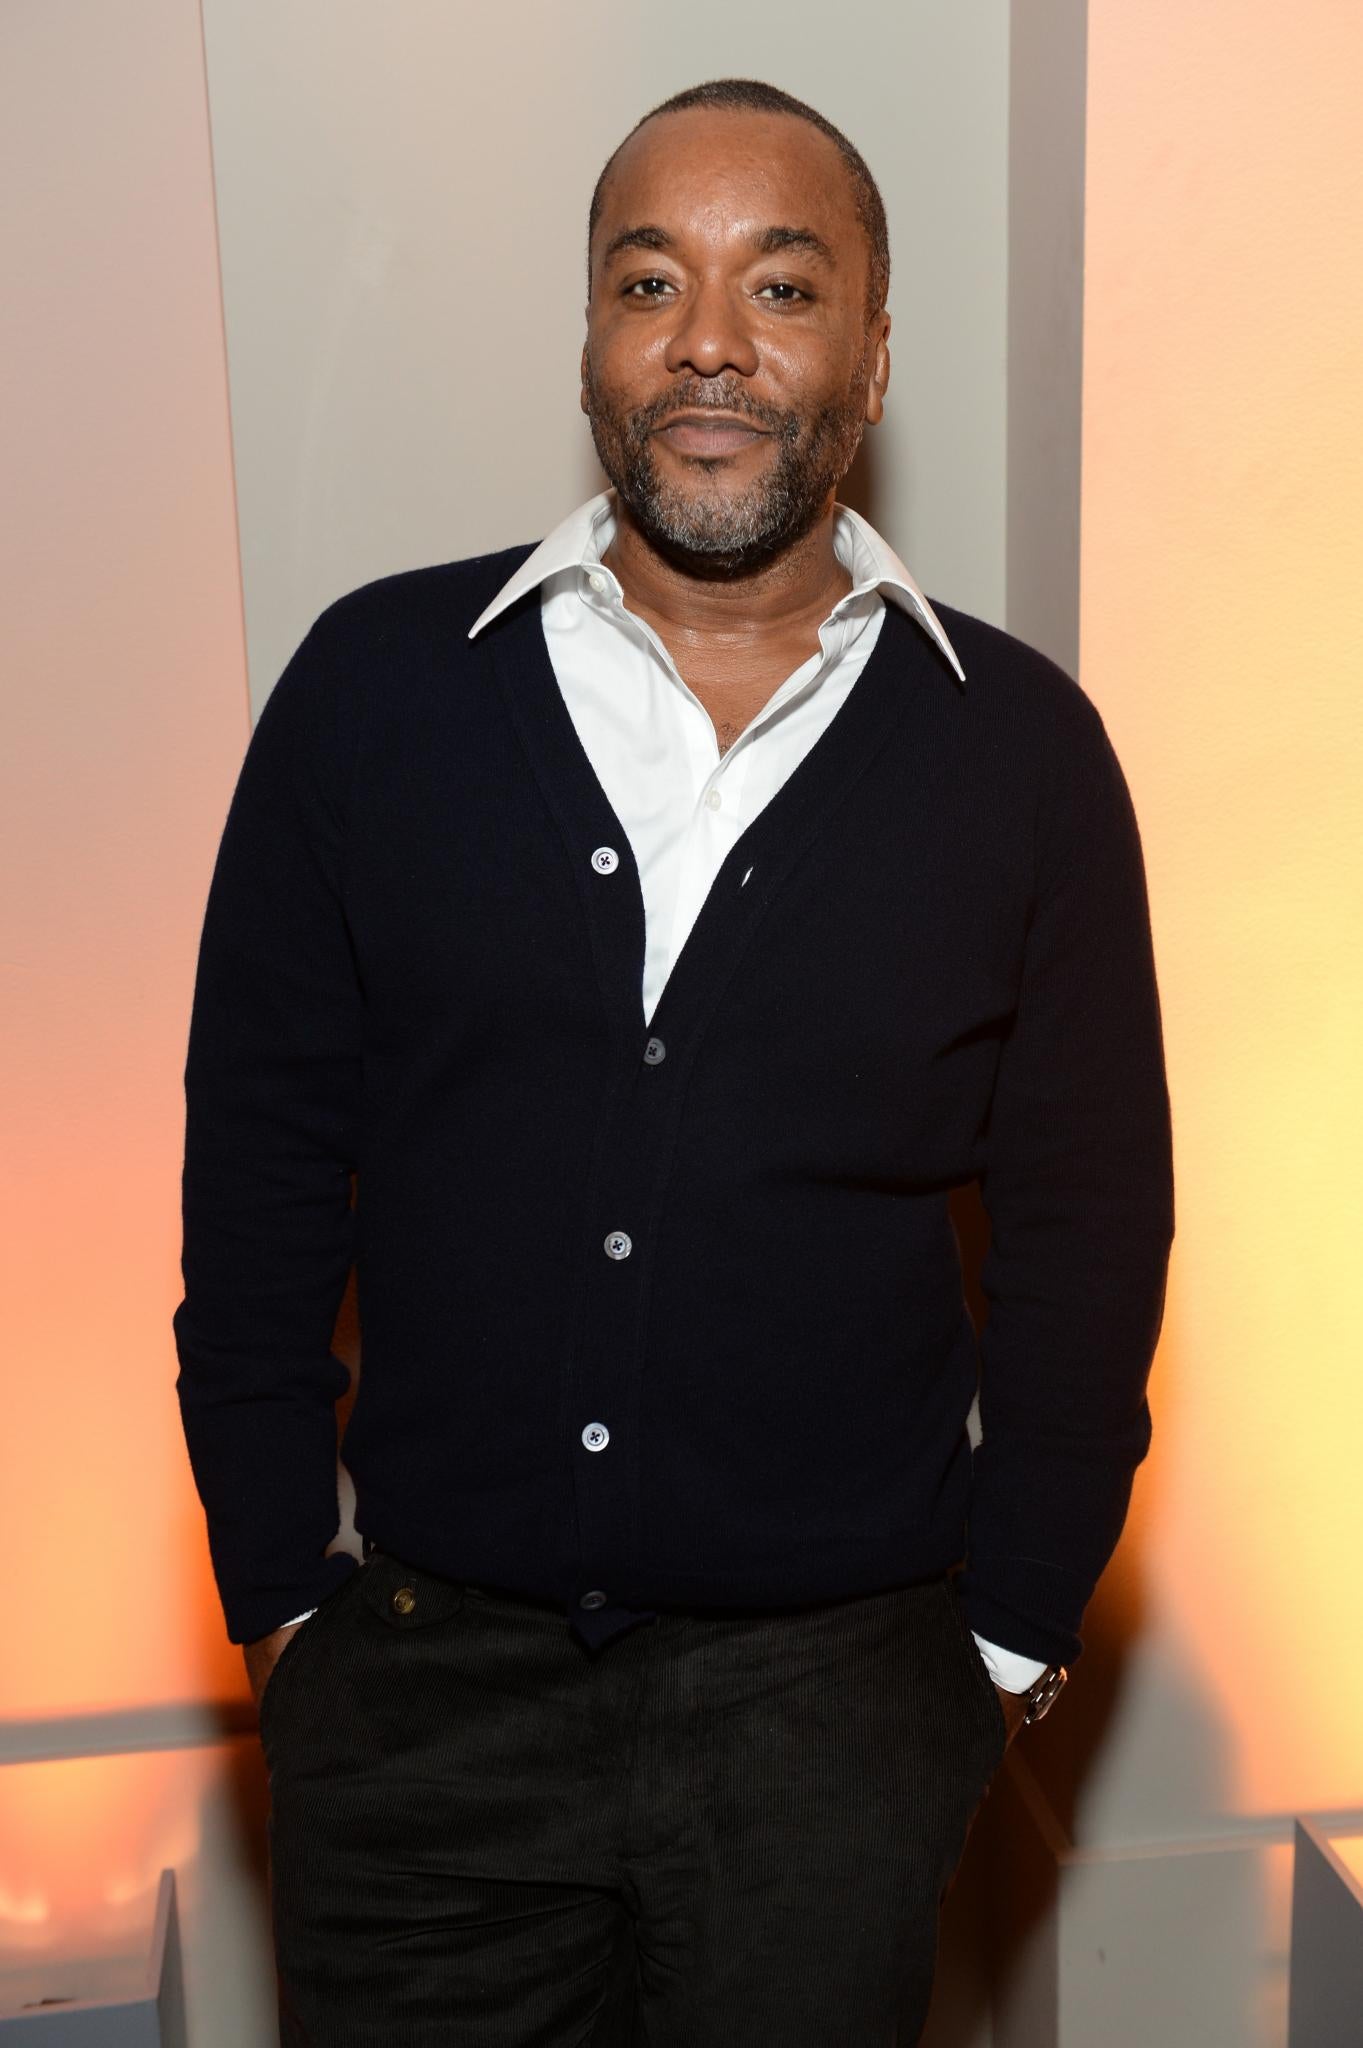 Lee Daniels Talks Empire Growing Pains and Launching New Girl Group TV Show, Star
